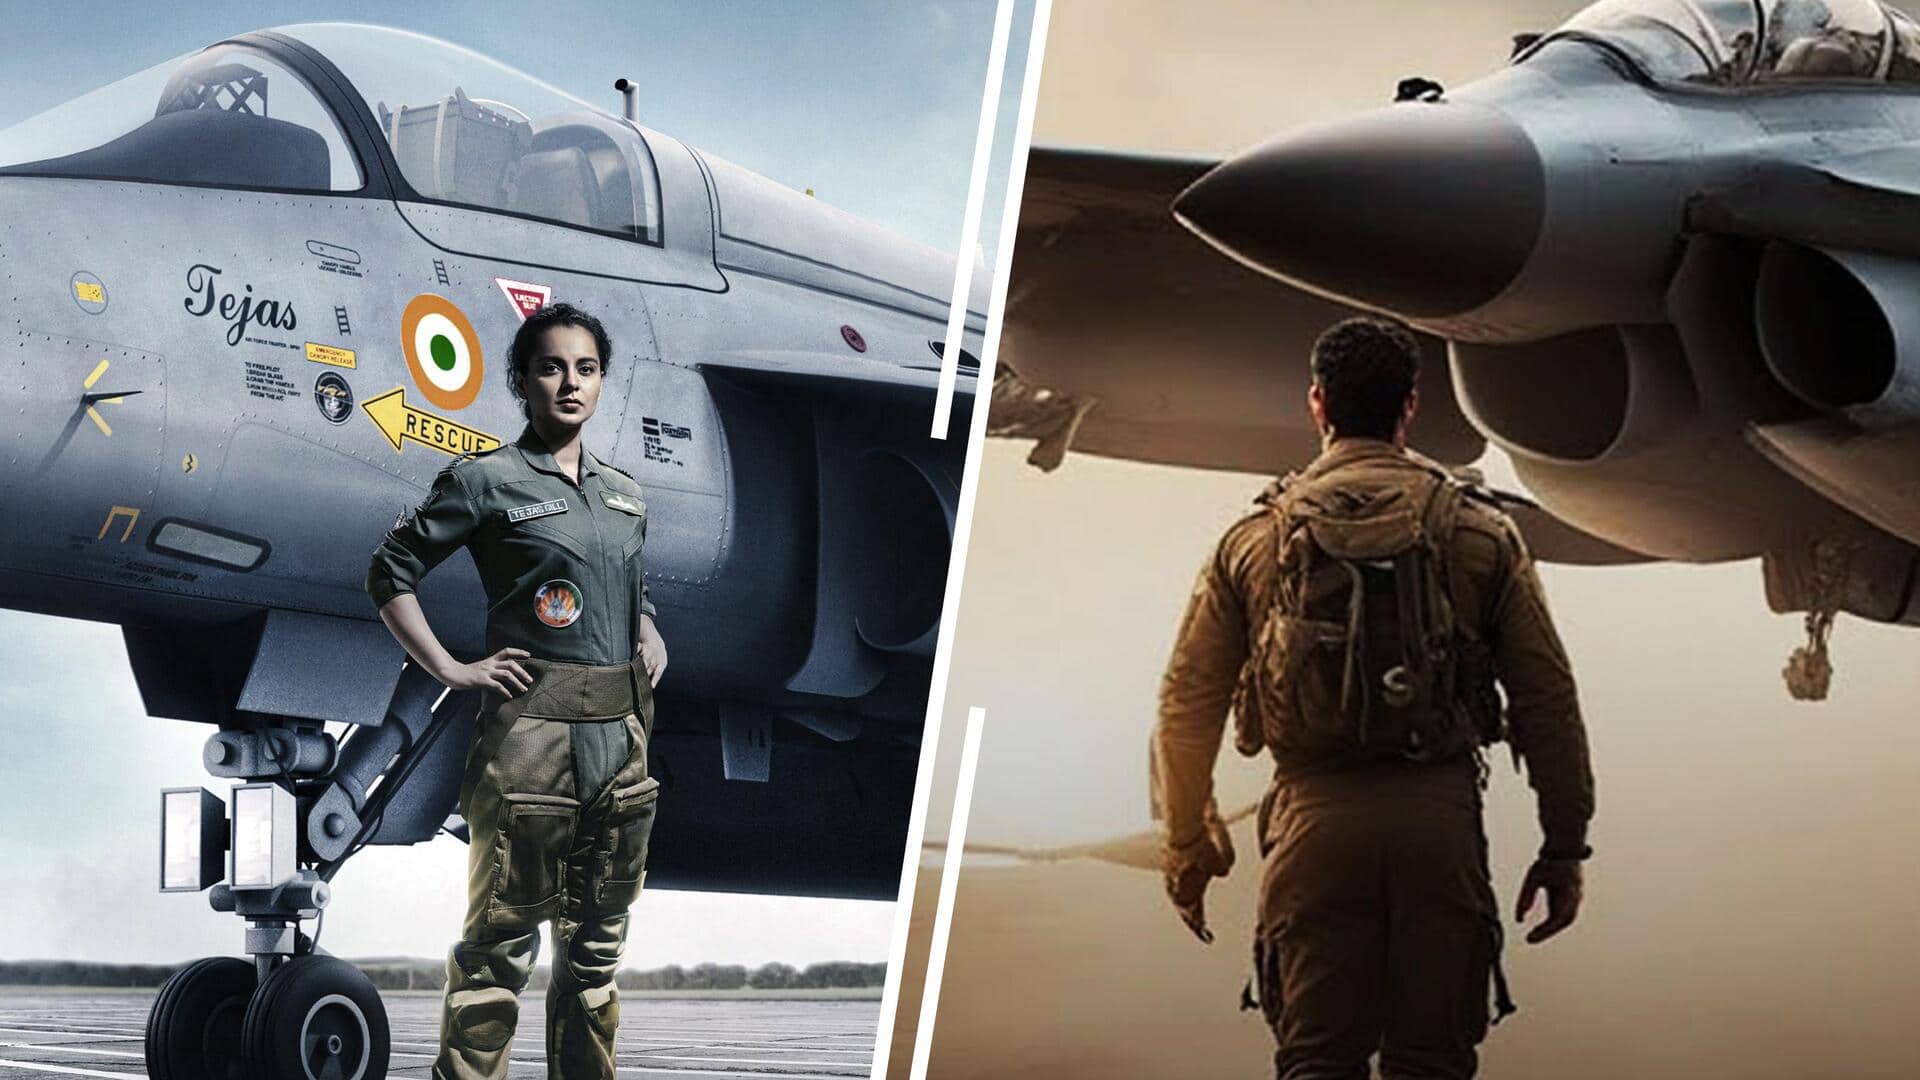 'Tejas' to 'Fighter': Upcoming films with Indian Air Force backdrop